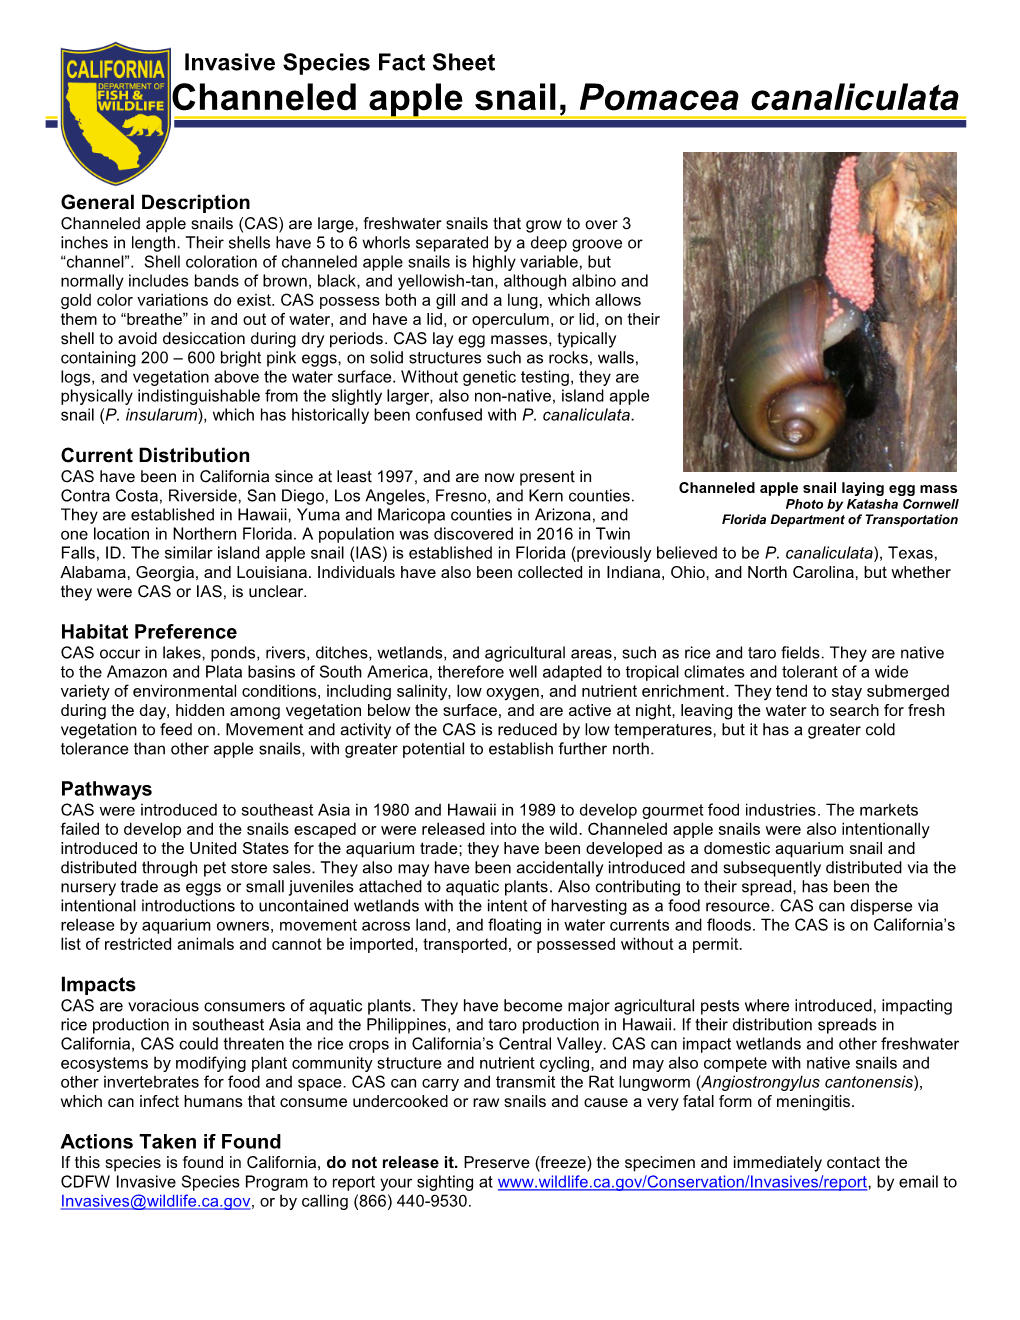 Channeled Apple Snail, Pomacea Canaliculata